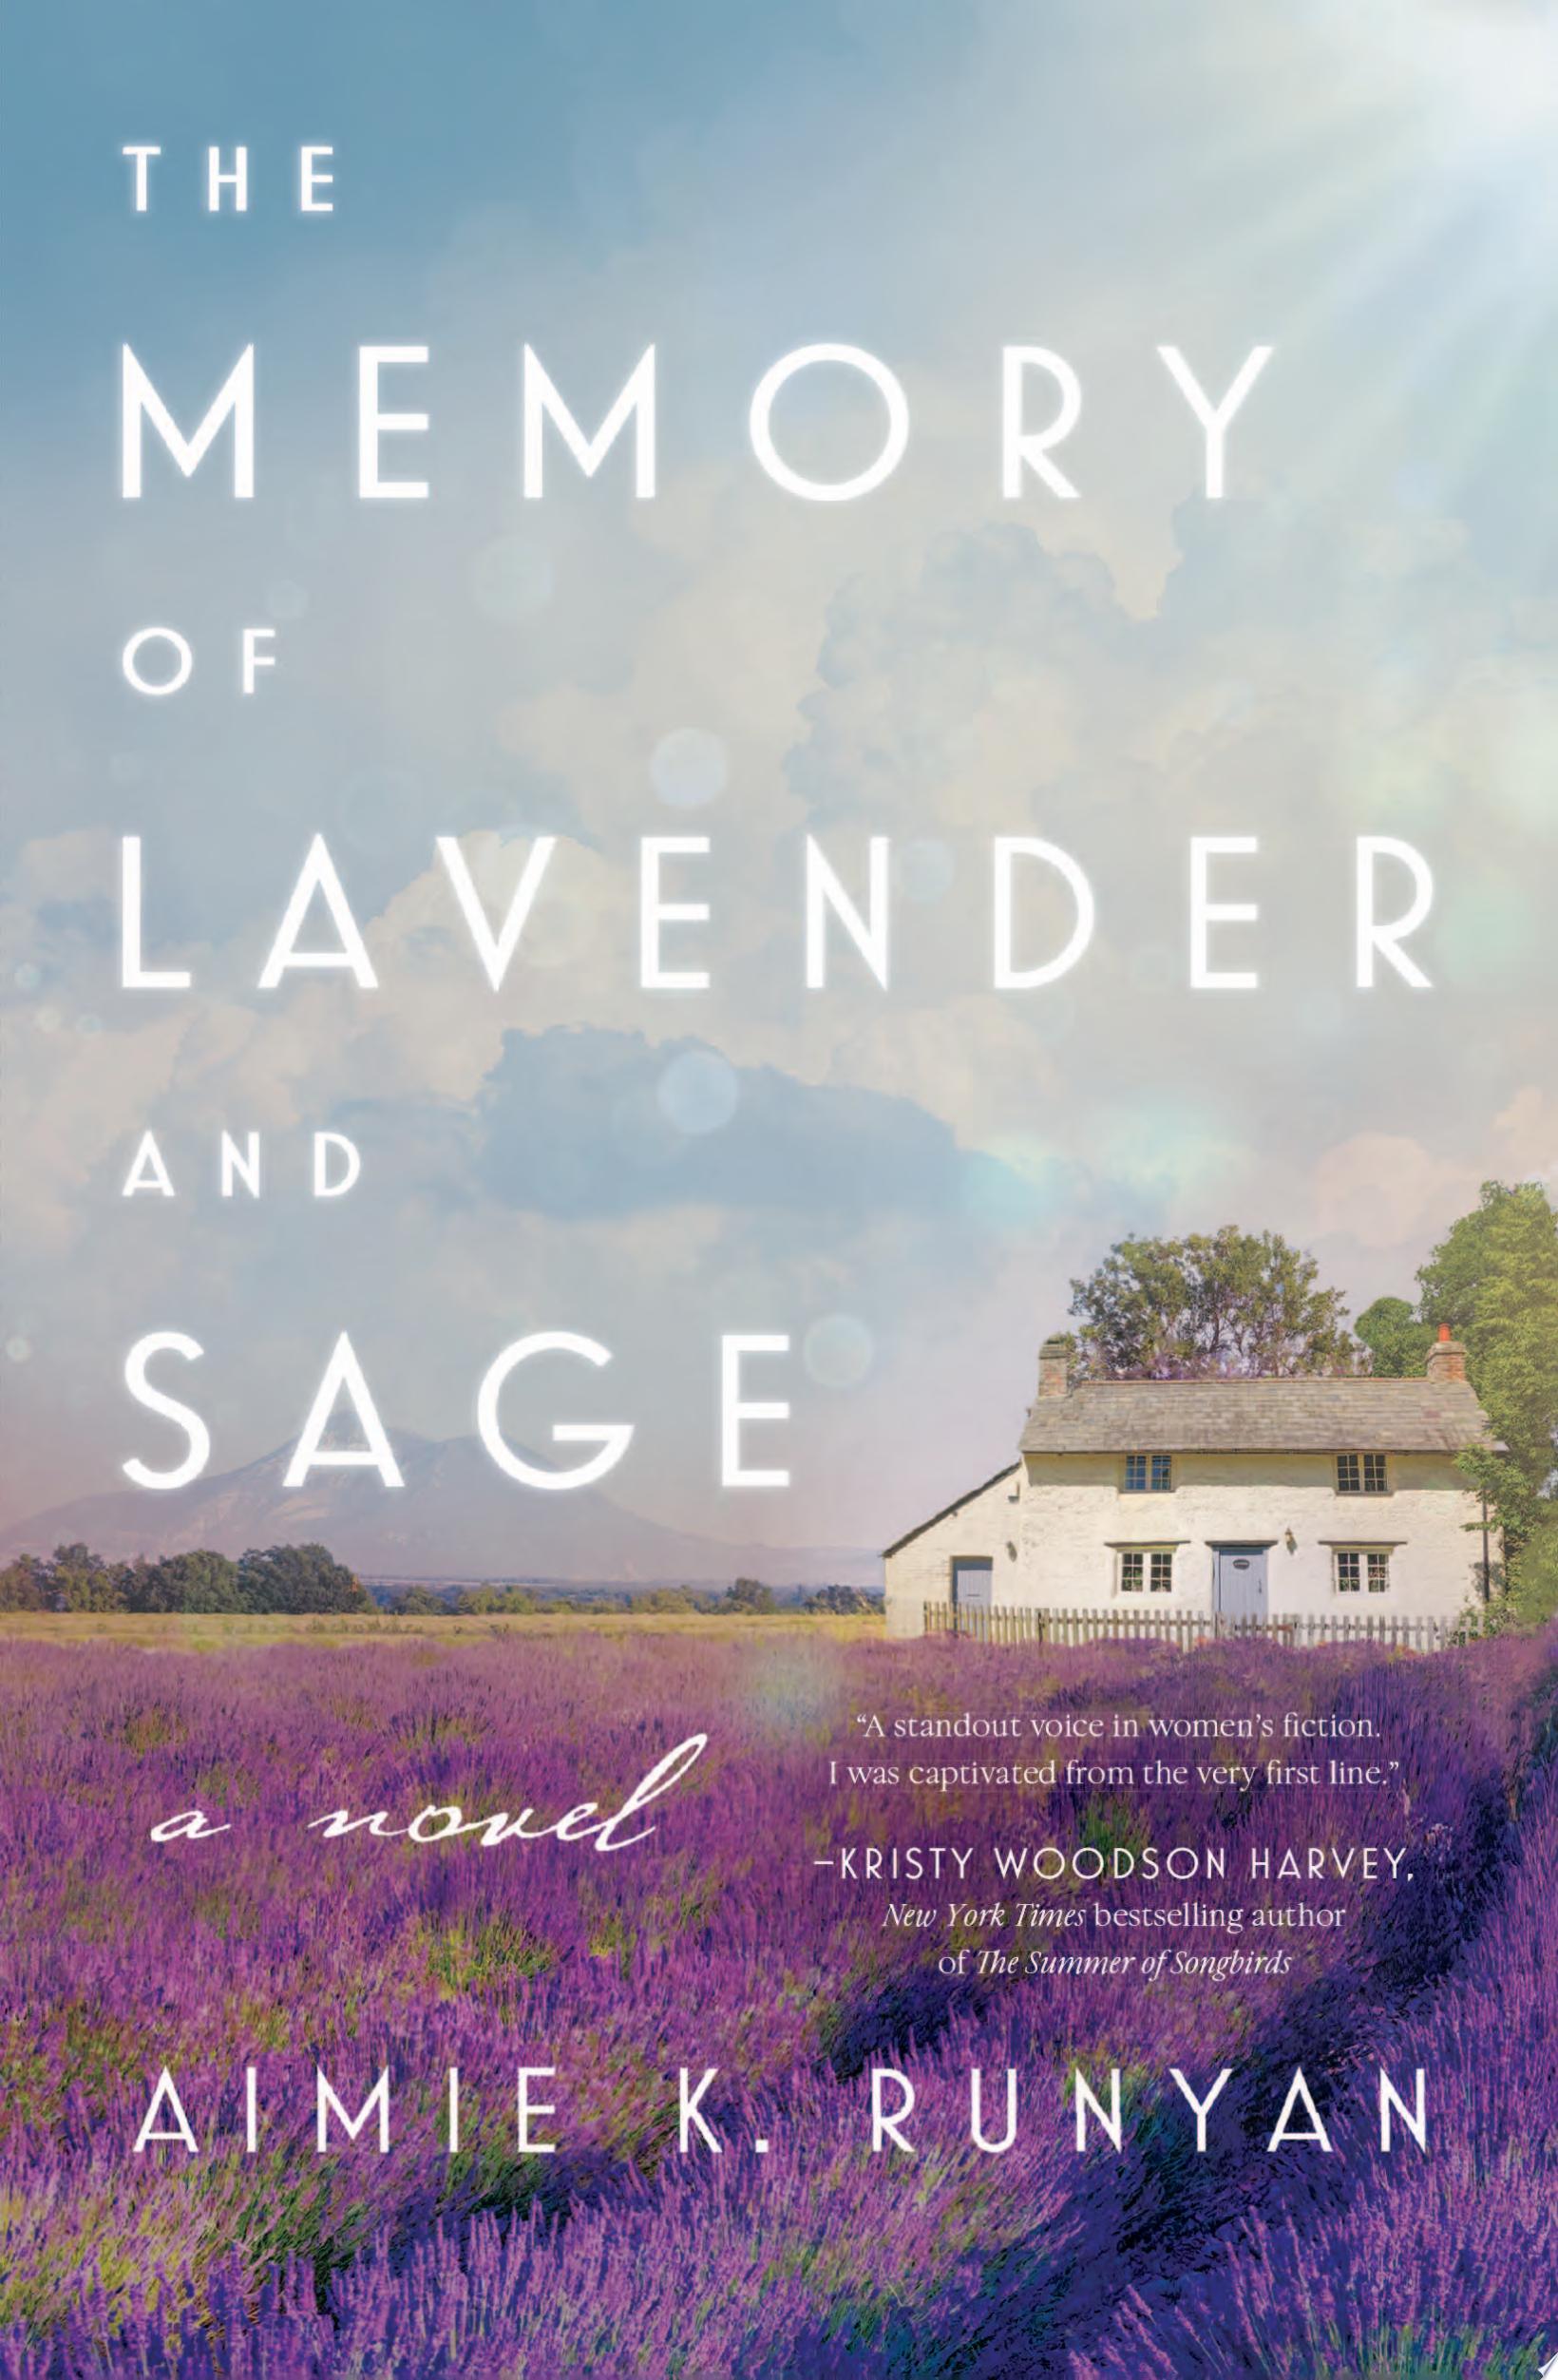 Image for "The Memory of Lavender and Sage"